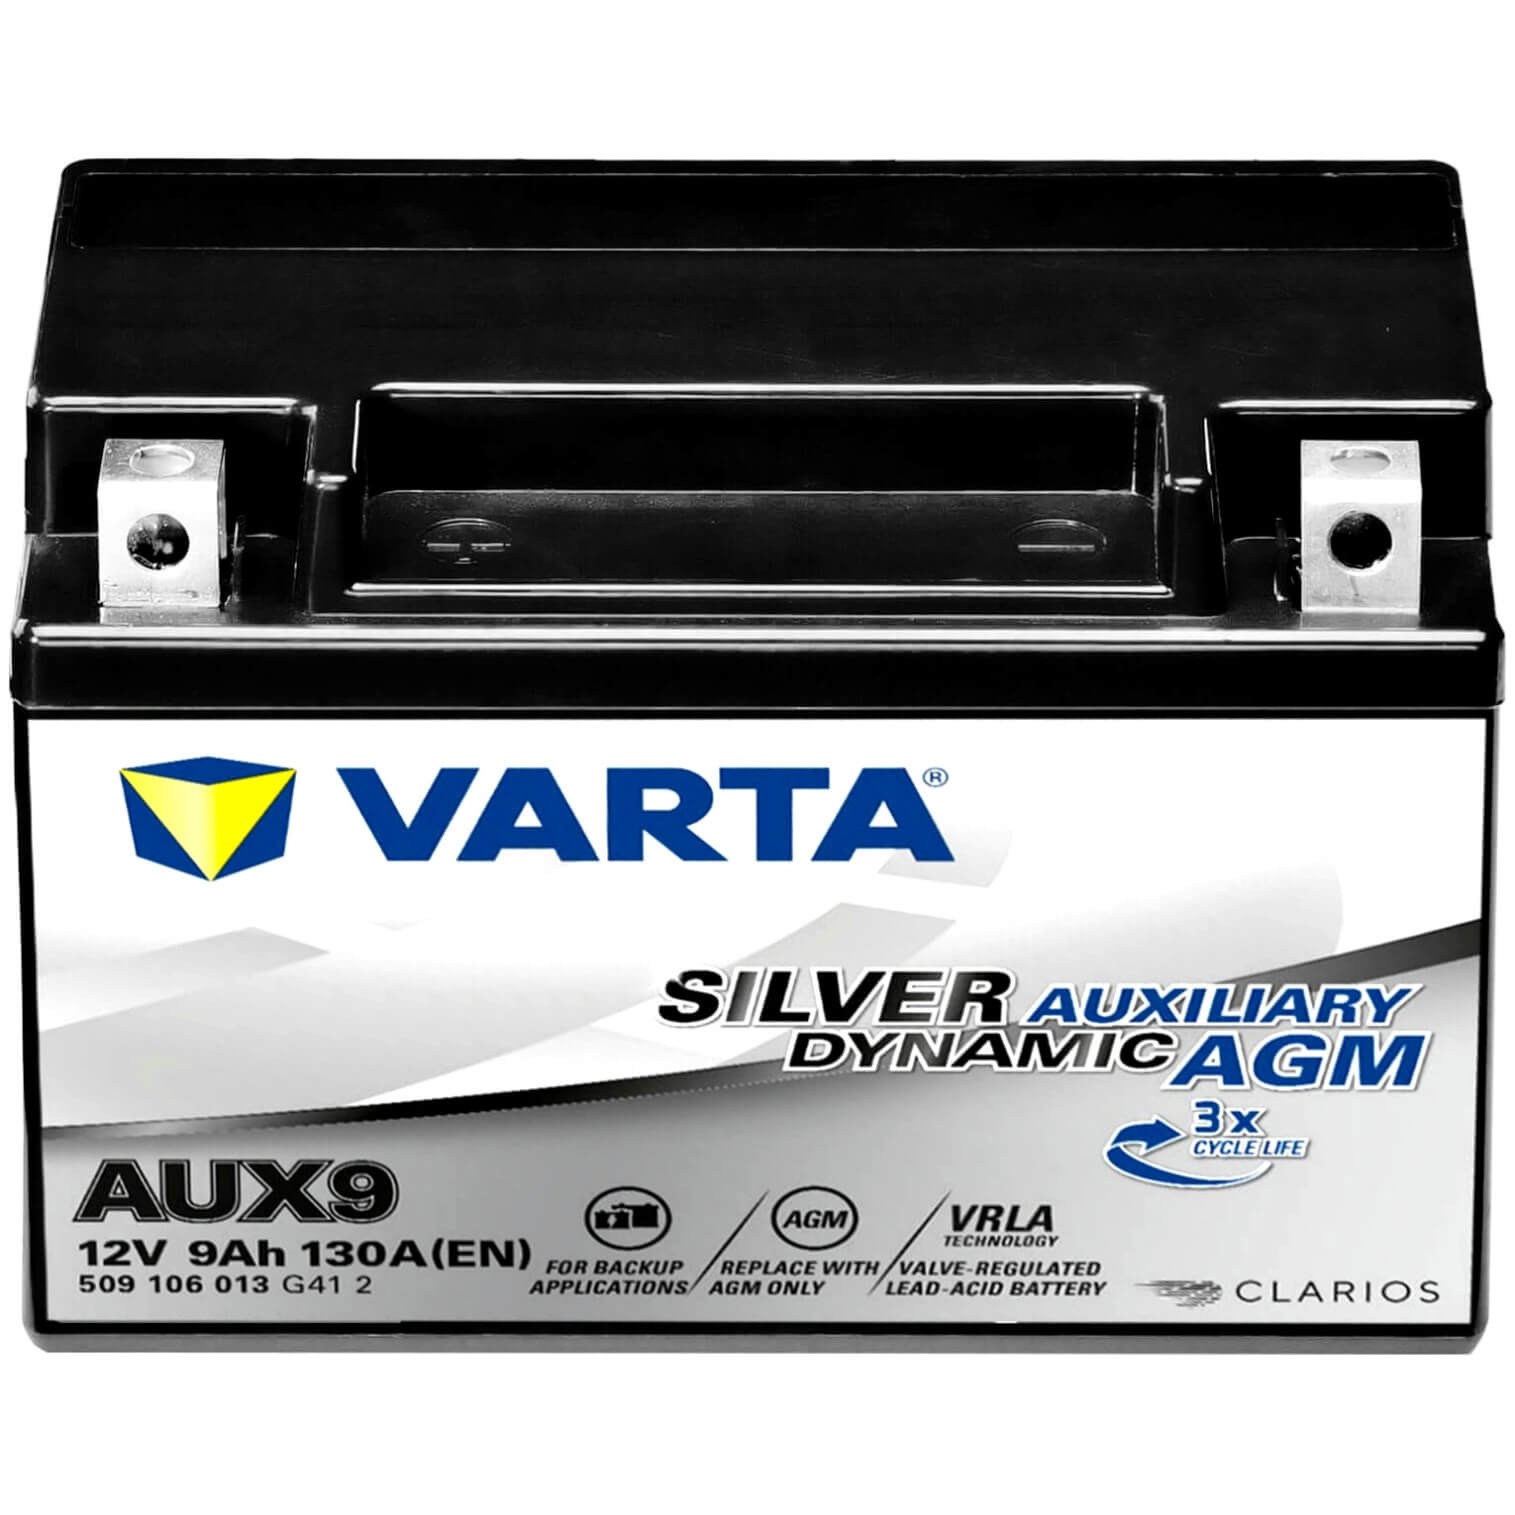 Diesel Parts Direct - AUX1 VARTA SILVER DYNAMIC AUXILIARY 12V 35AH BATTERY  (535 106 052)